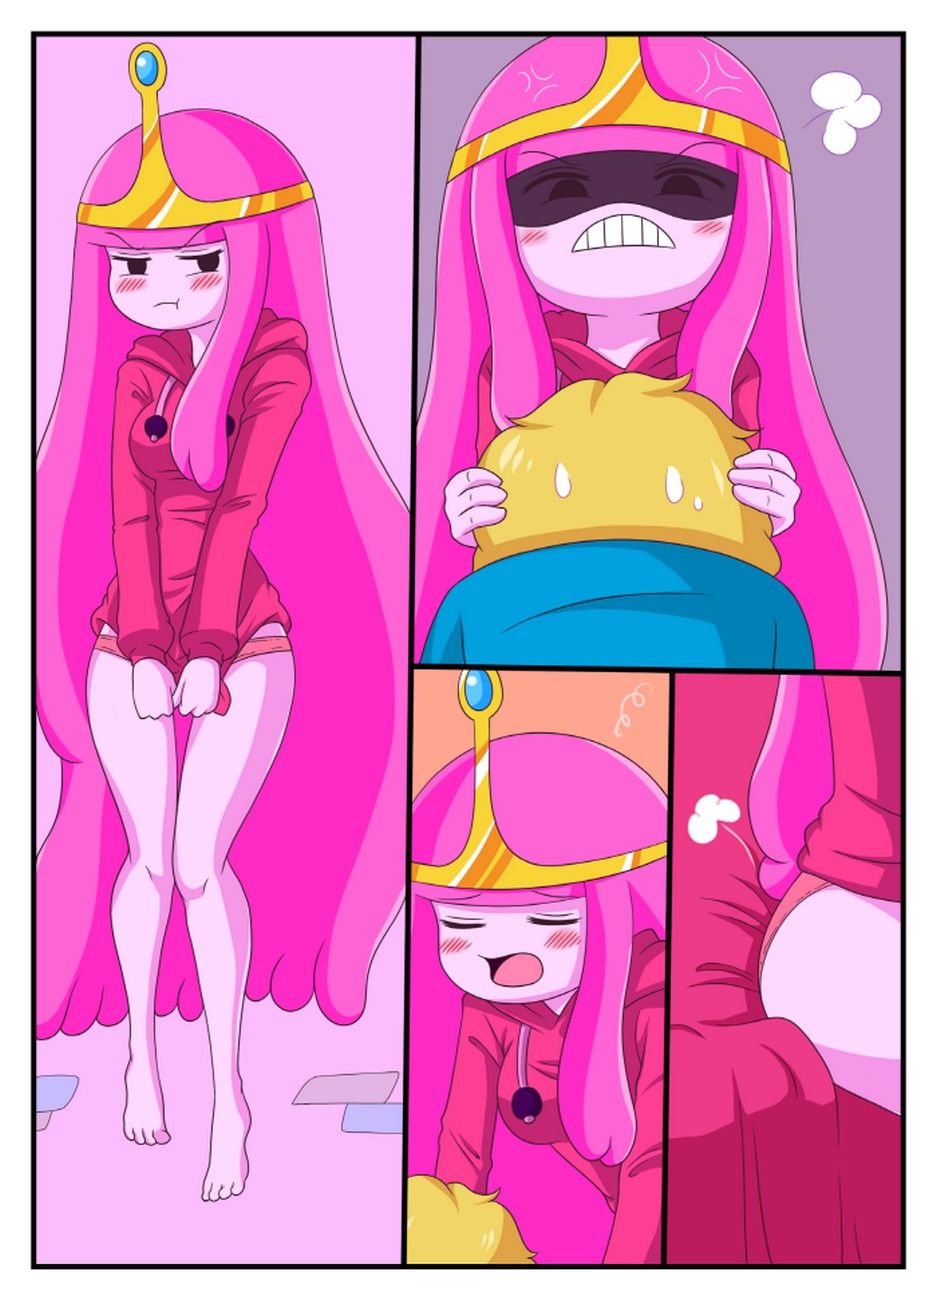 Adventure_Time-Adult_Time_1 comix_43440.jpg 